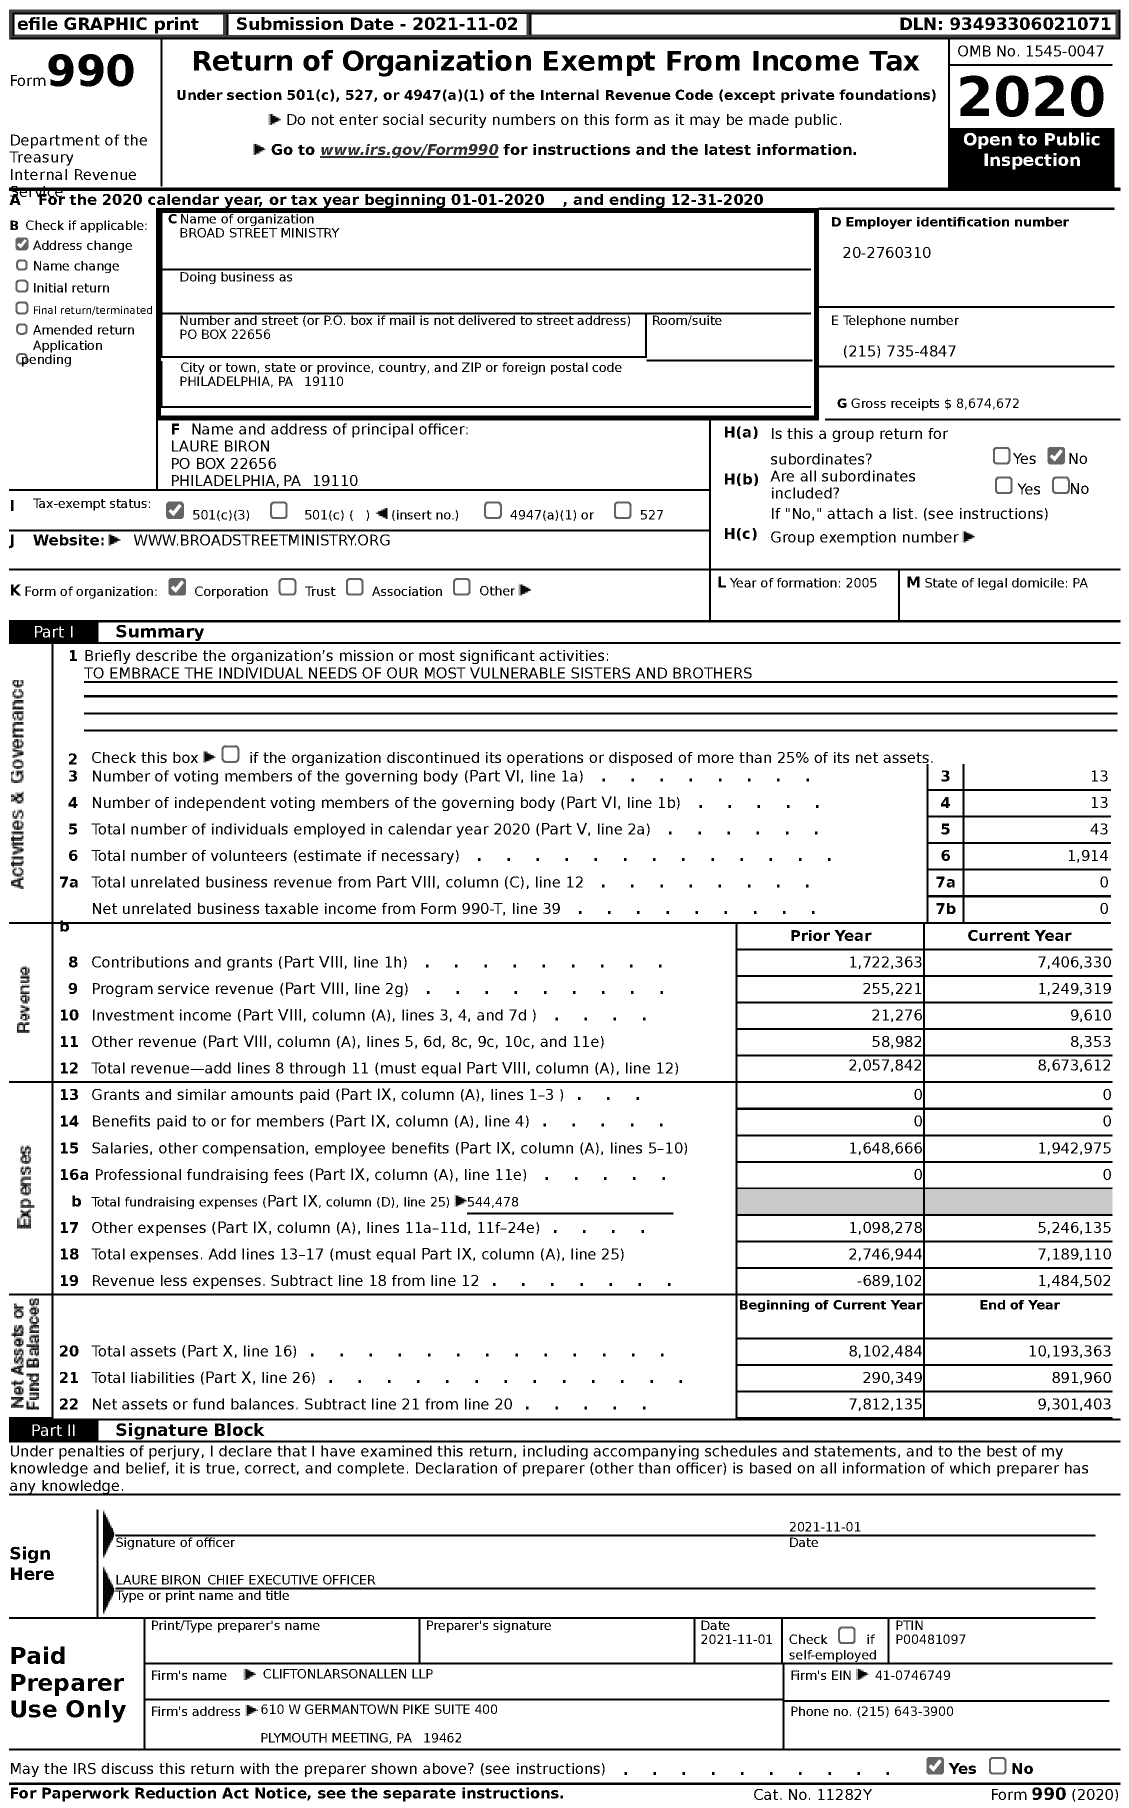 Image of first page of 2020 Form 990 for Broad Street Ministry (BSM)